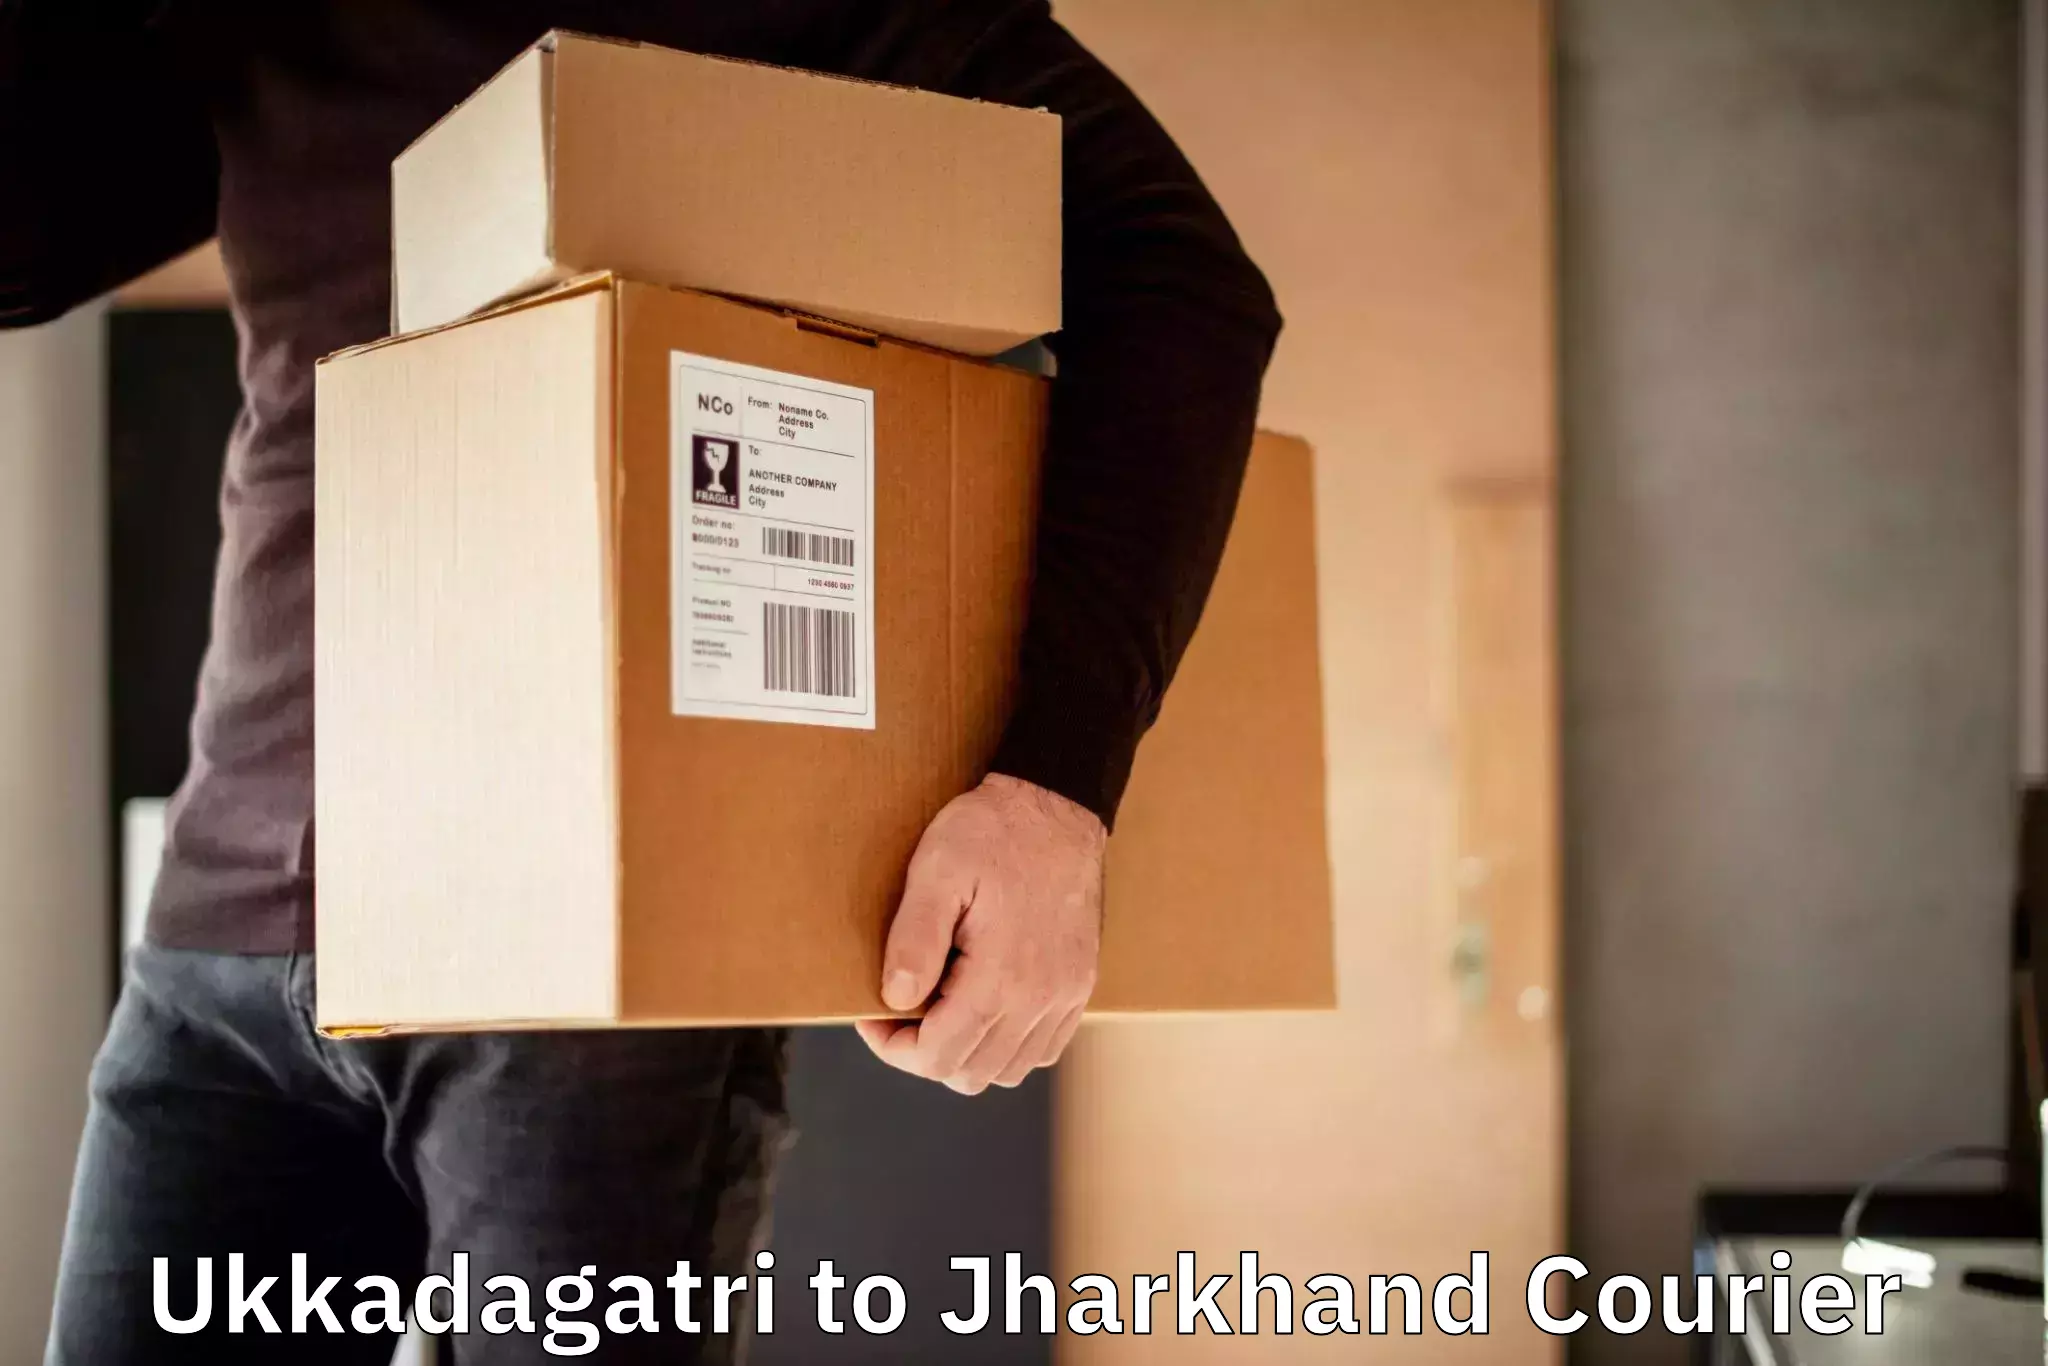 State-of-the-art courier technology Ukkadagatri to Bara Boarijor